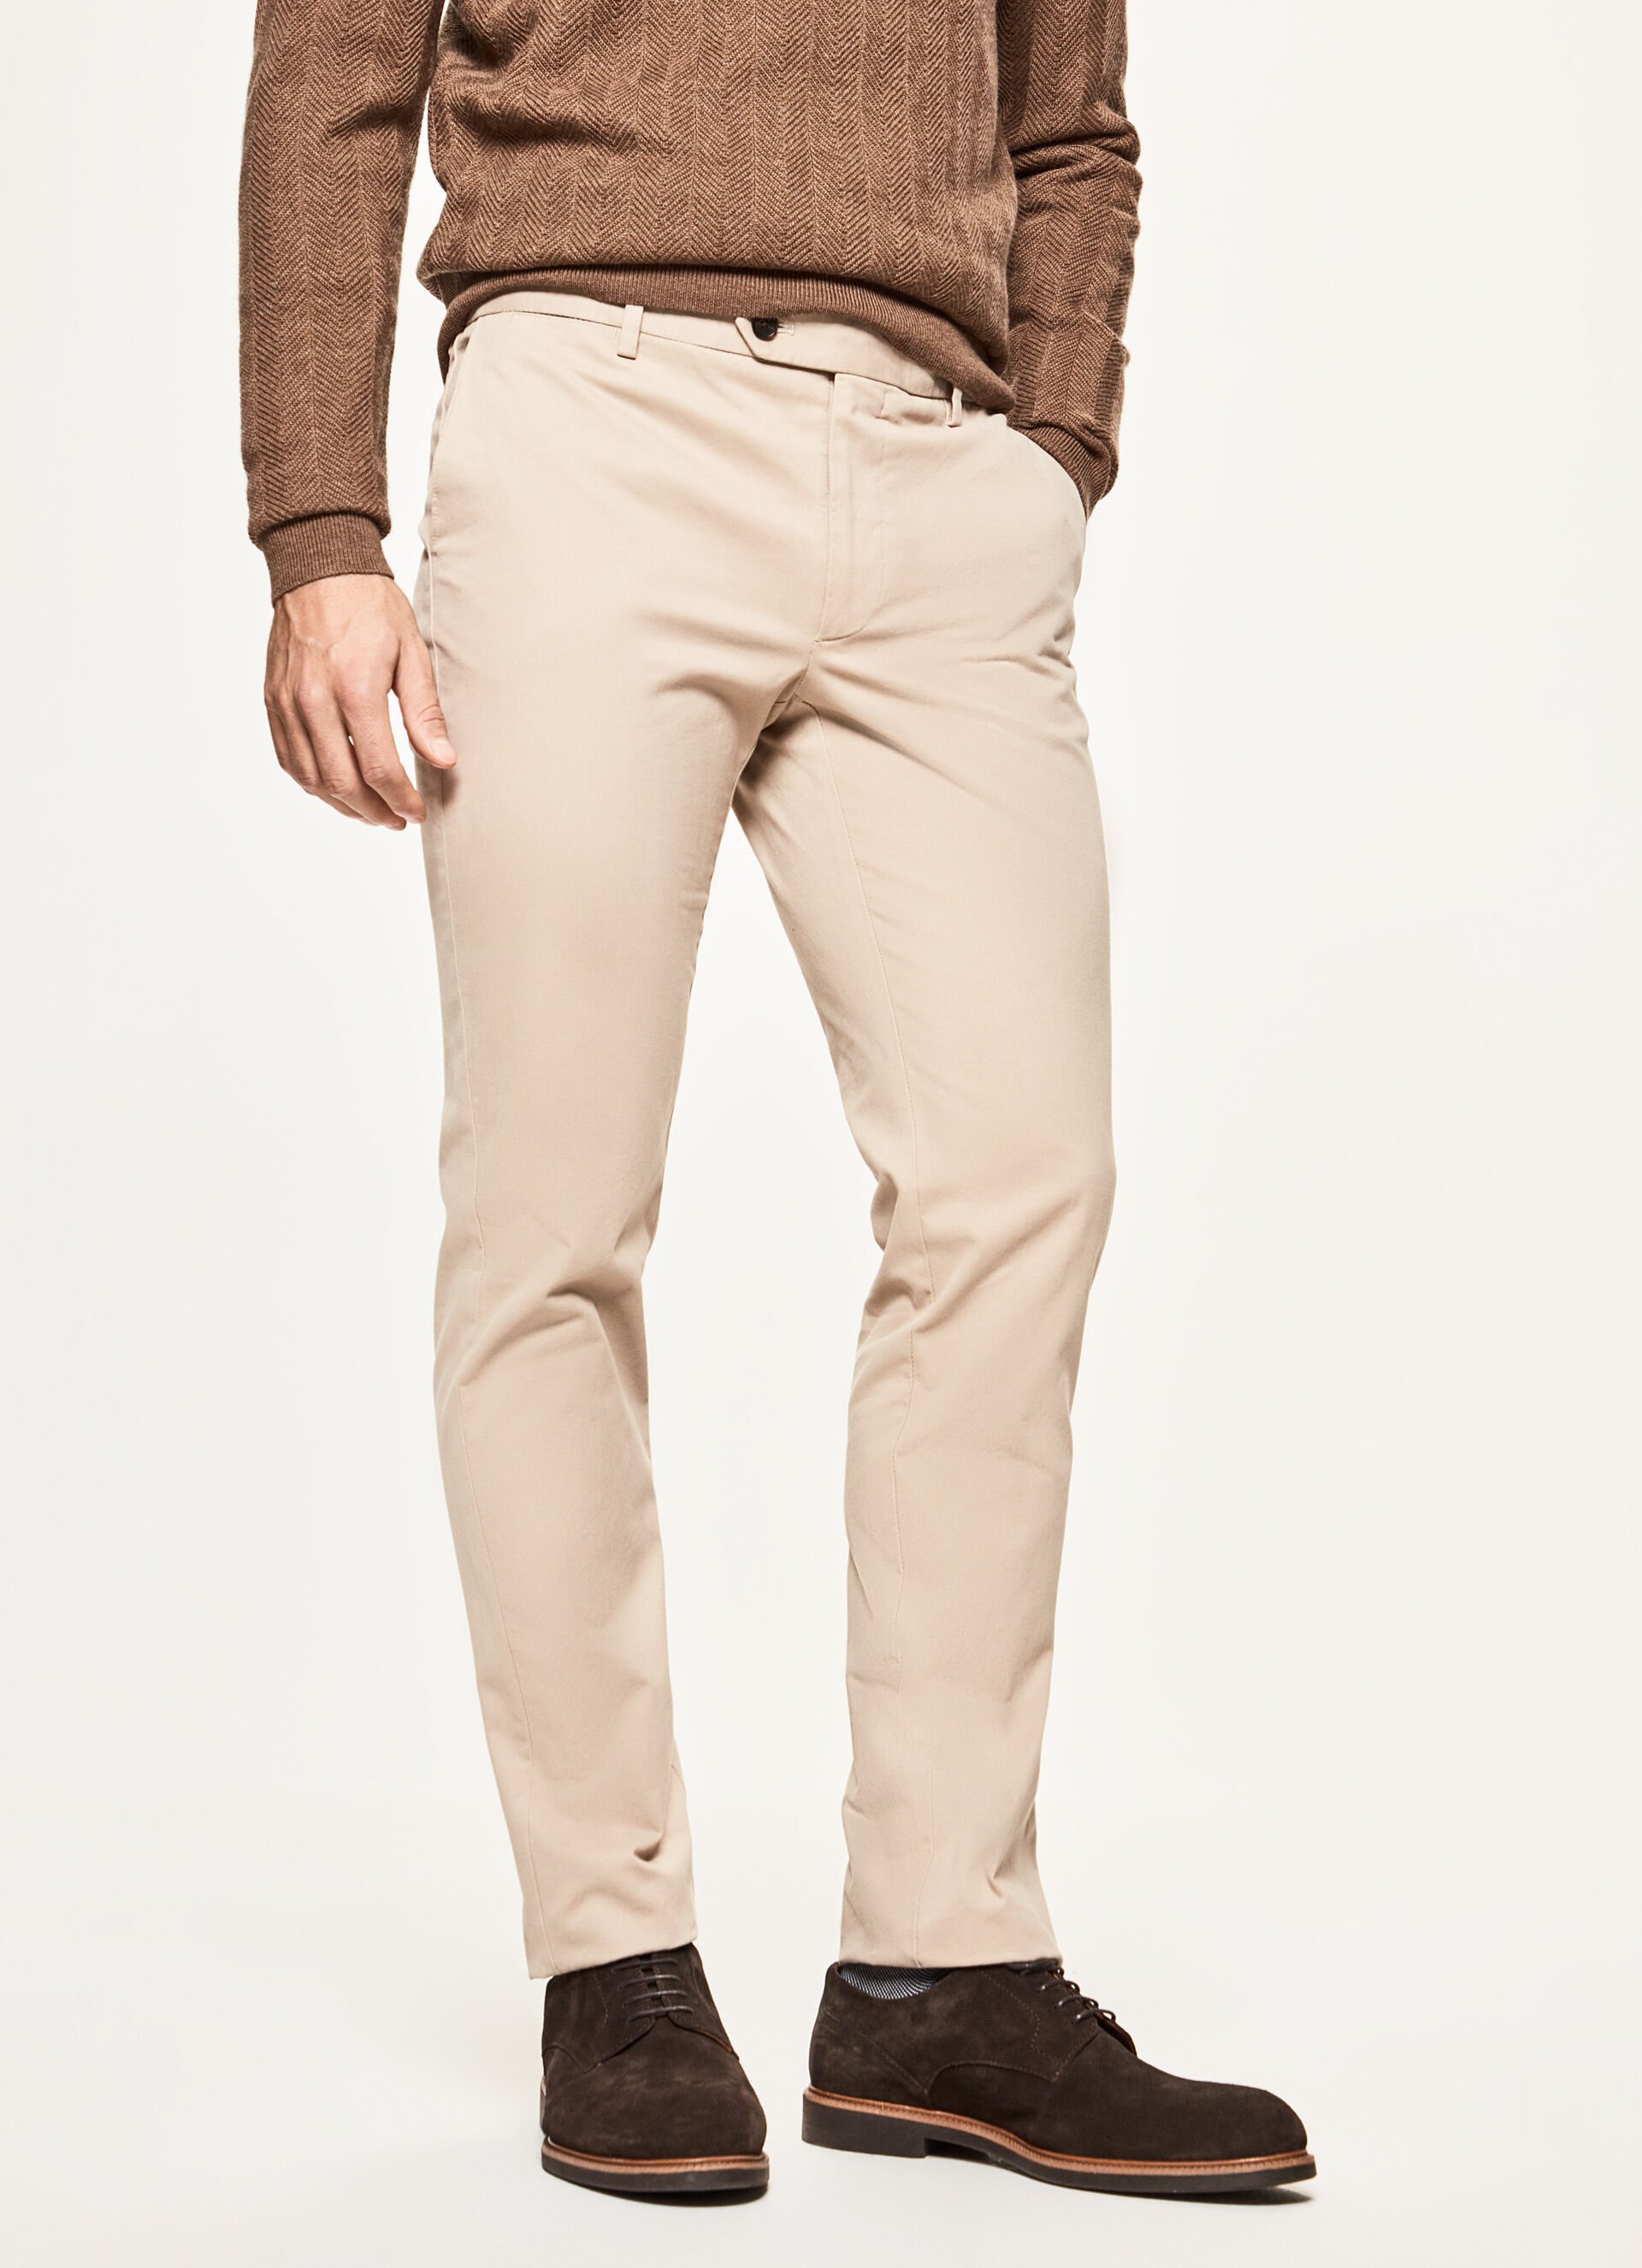 The Chino Fit Guide | Hackett